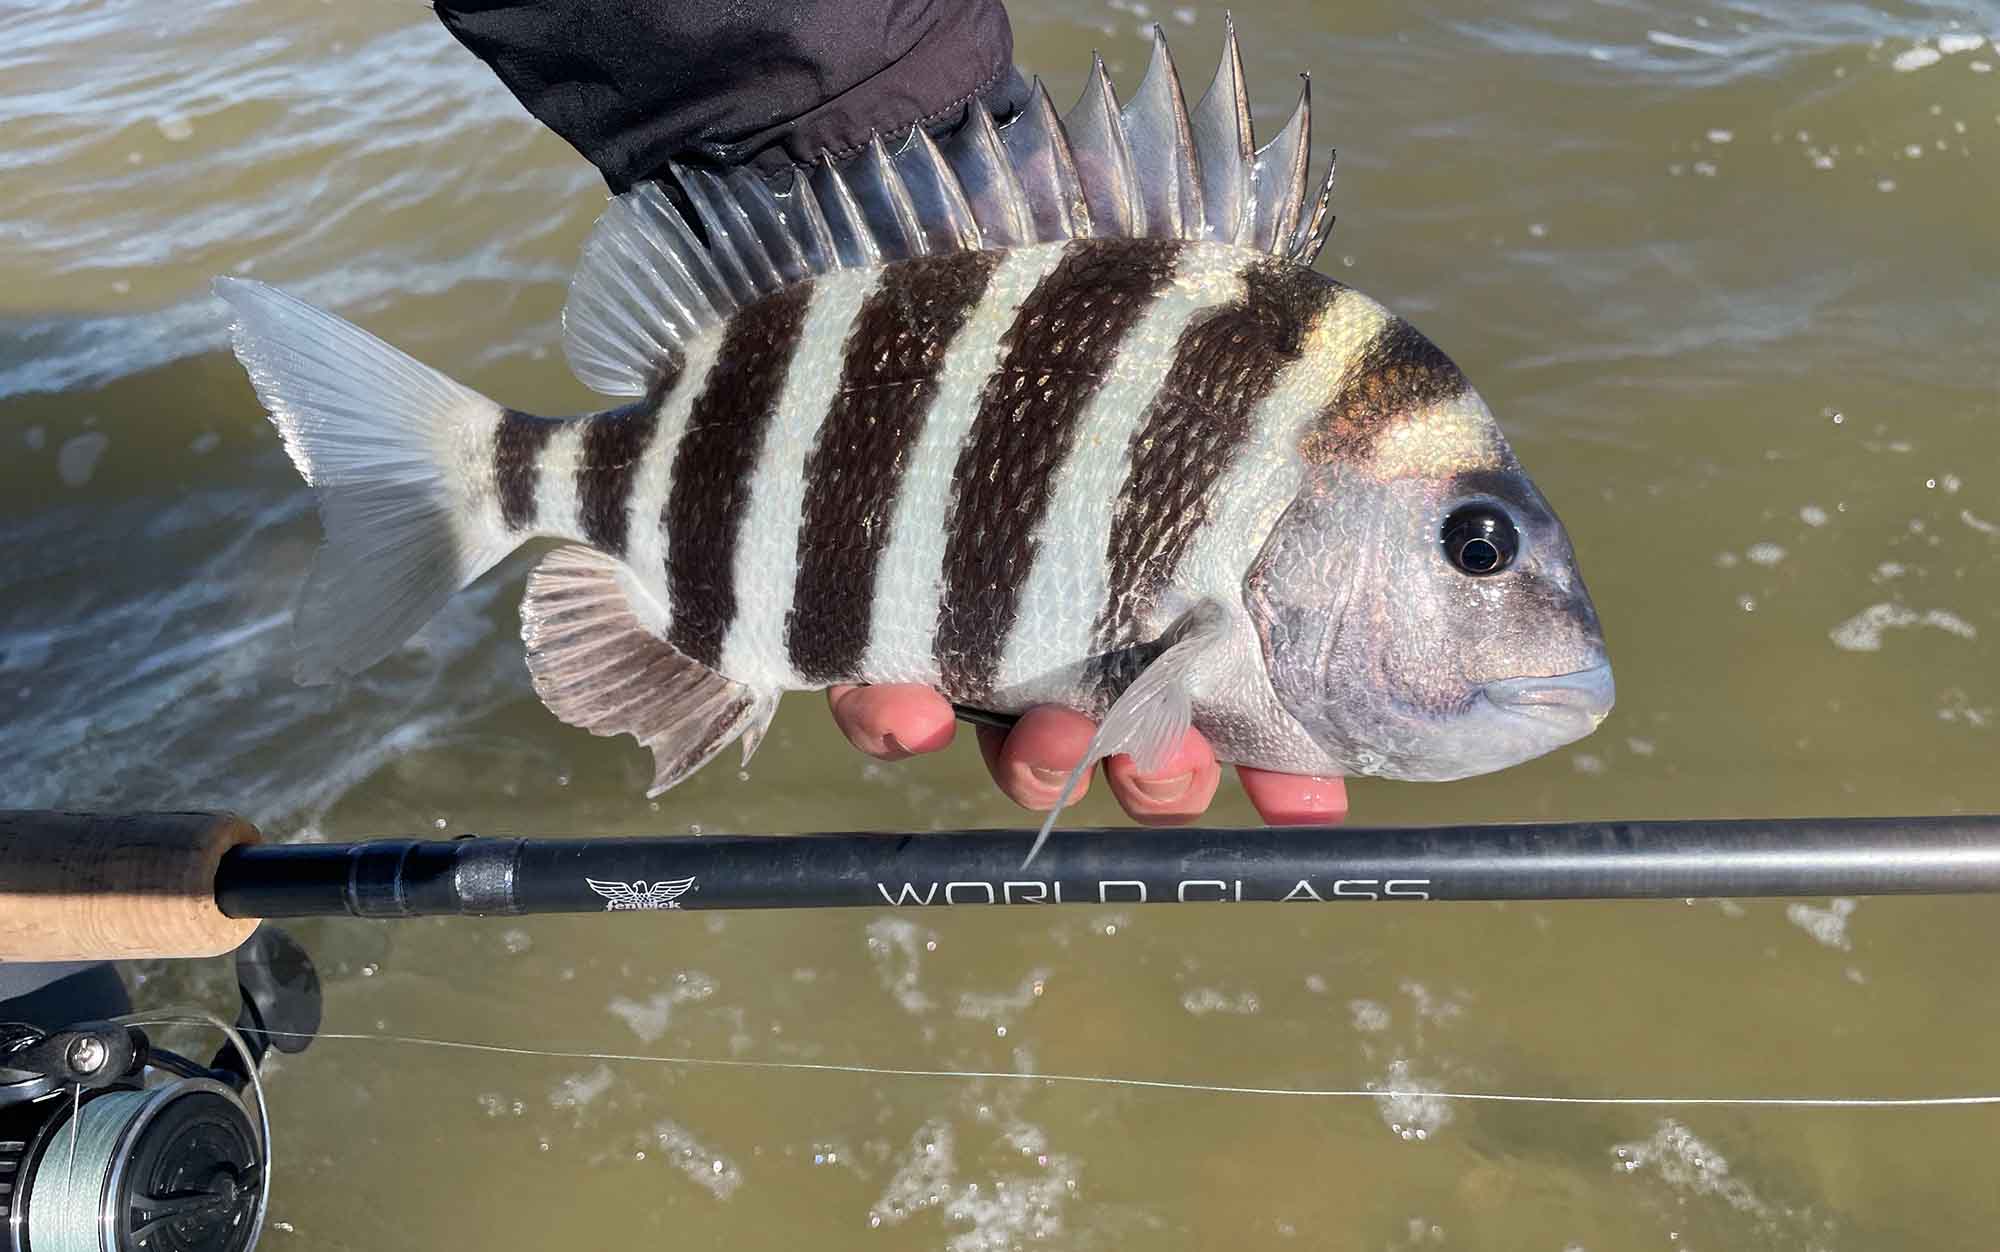 Author holds the Fenwick World Class and a sheepshead.